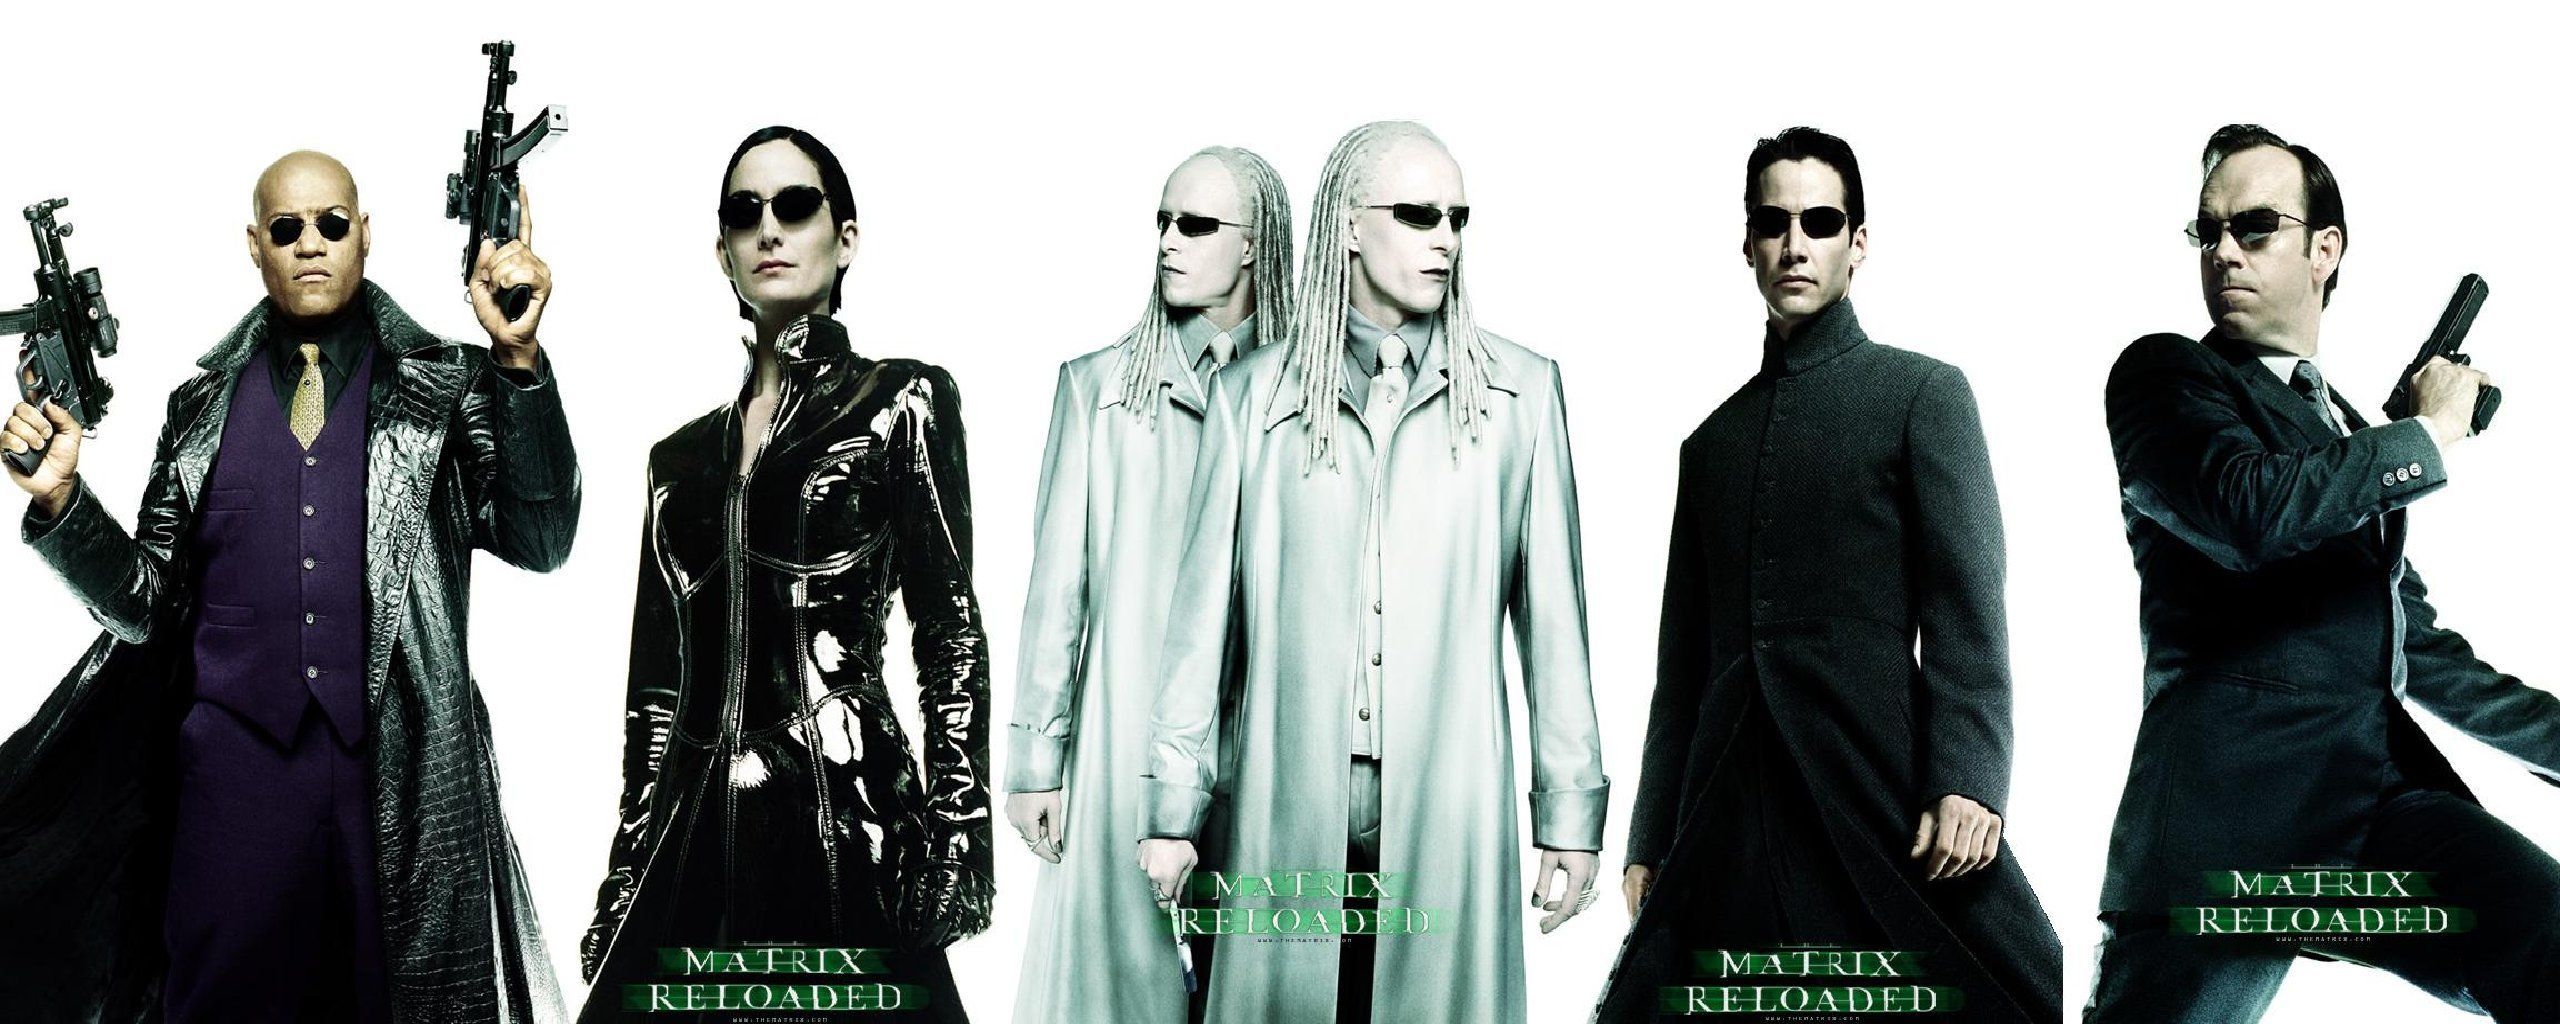 The Matrix(Reloaded) HD Background